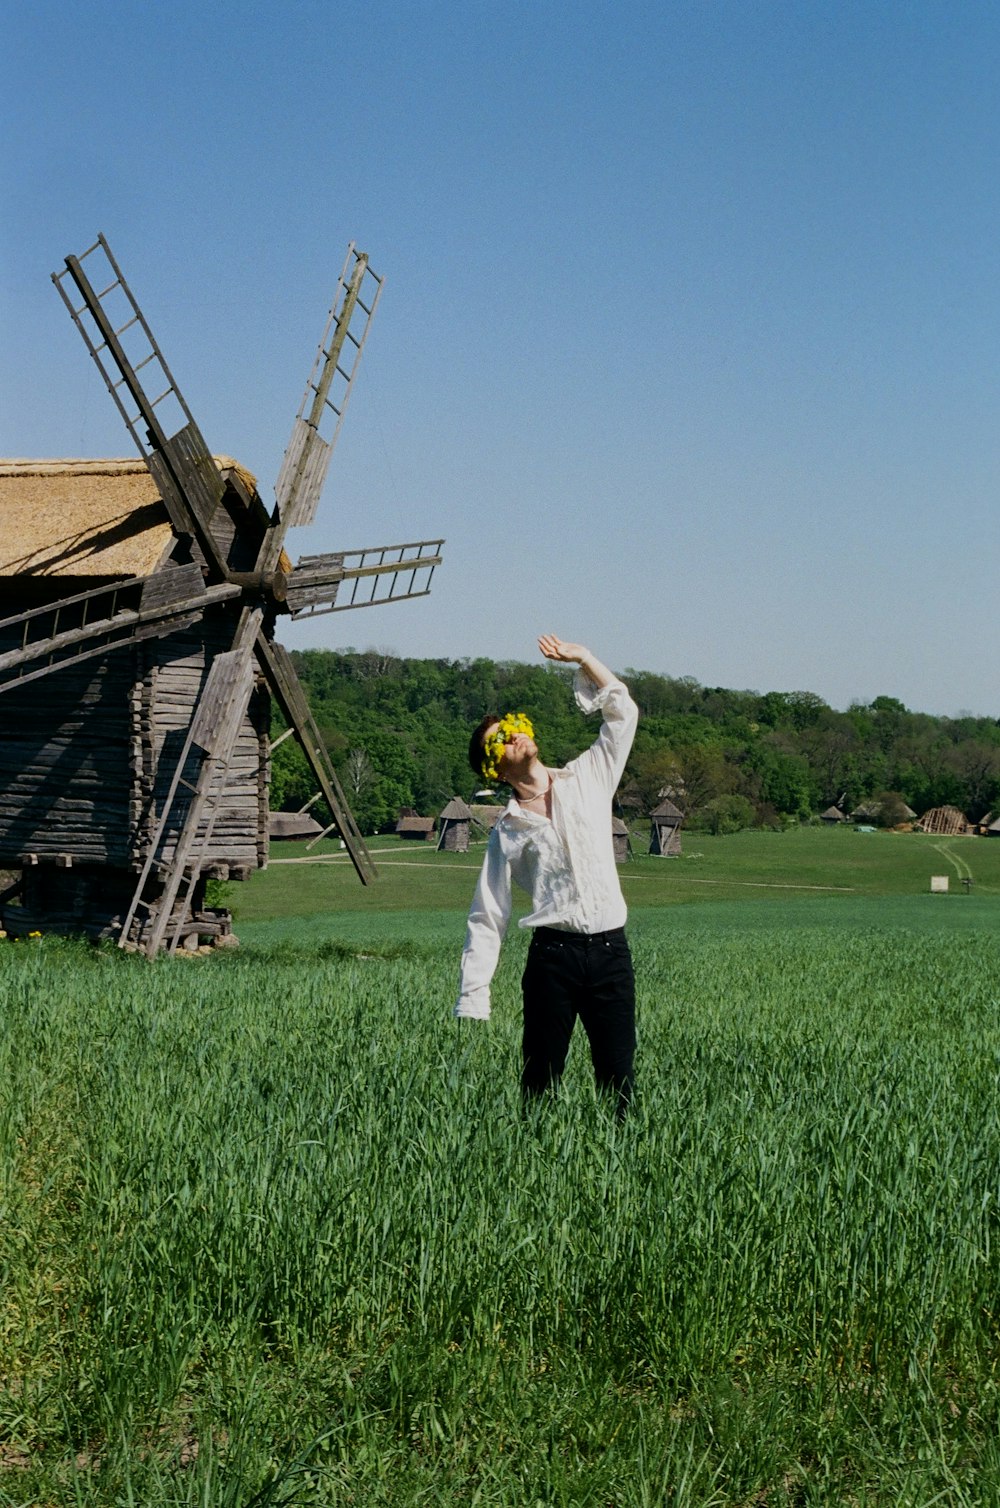 a person standing in a field with a windmill in the background